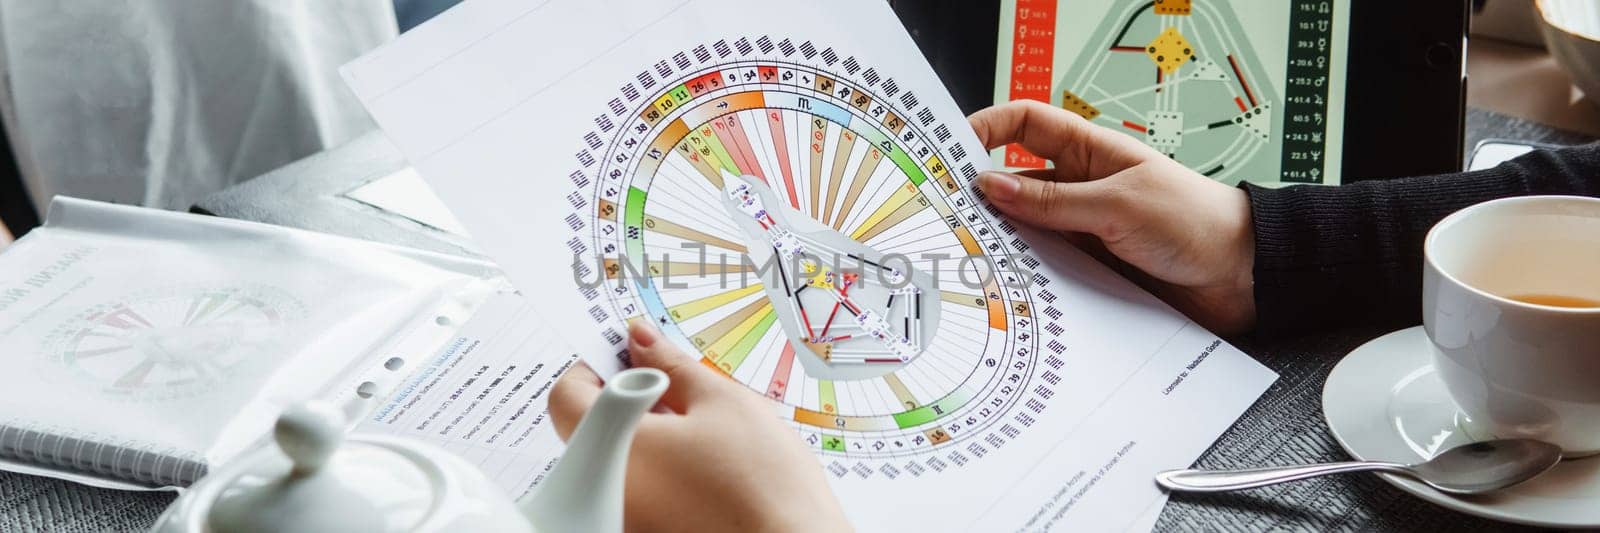 TVER, RUSSIA - FEBRUARY 12, 2023: A woman at the table is studying a rave mandala by human design. Rave mandala on the table close-up. The concept of esoteric teachings